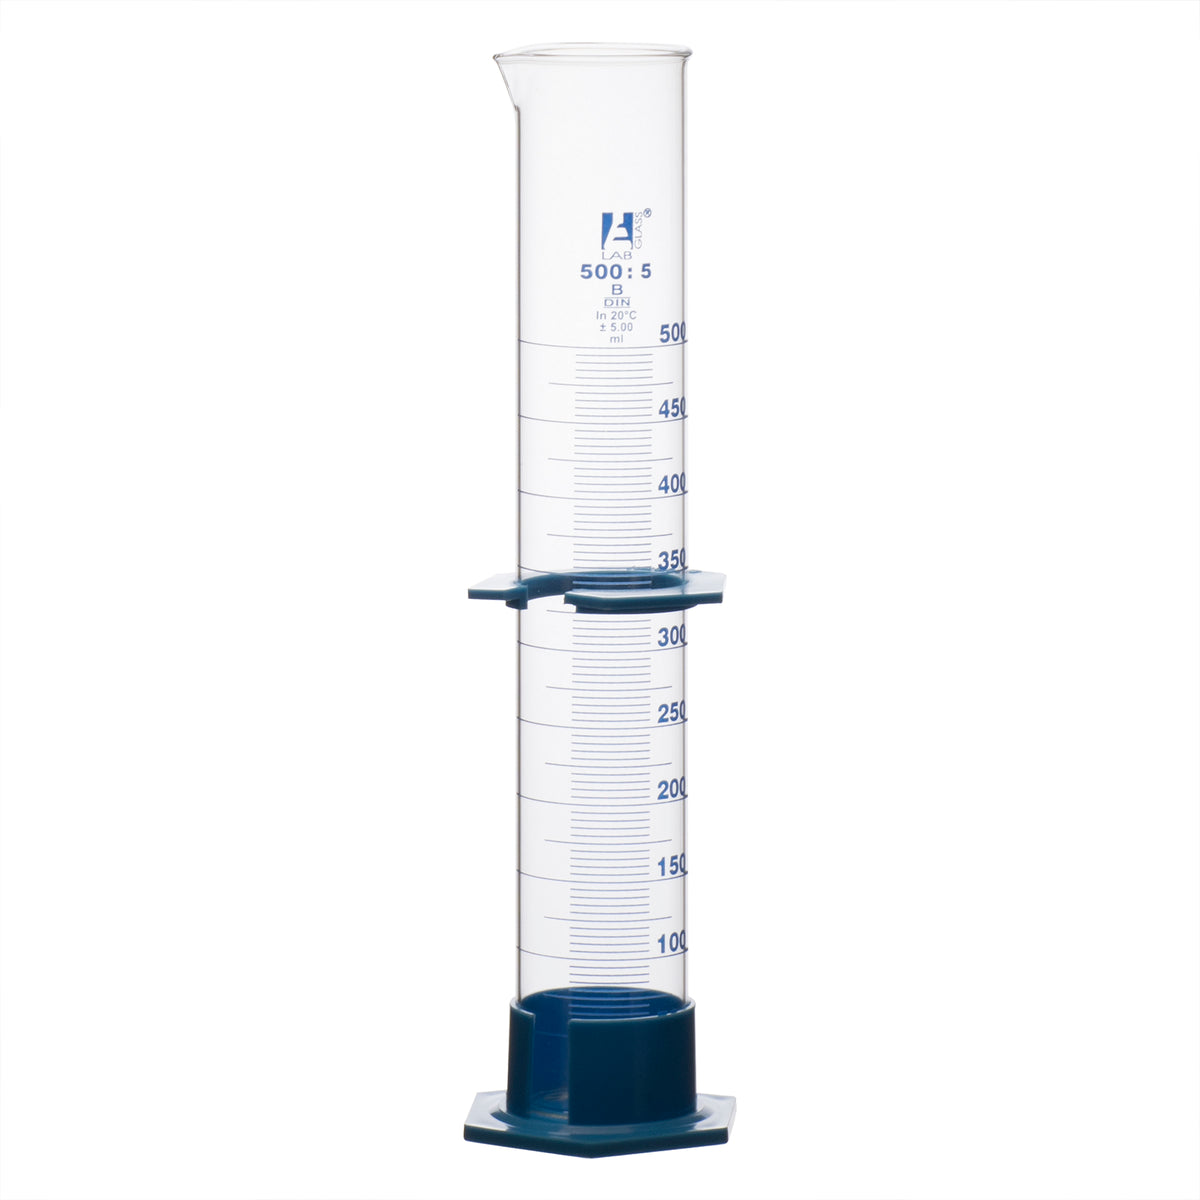 (Discontinued) Measuring Cylinder, 500ml - Class B Tolerance 